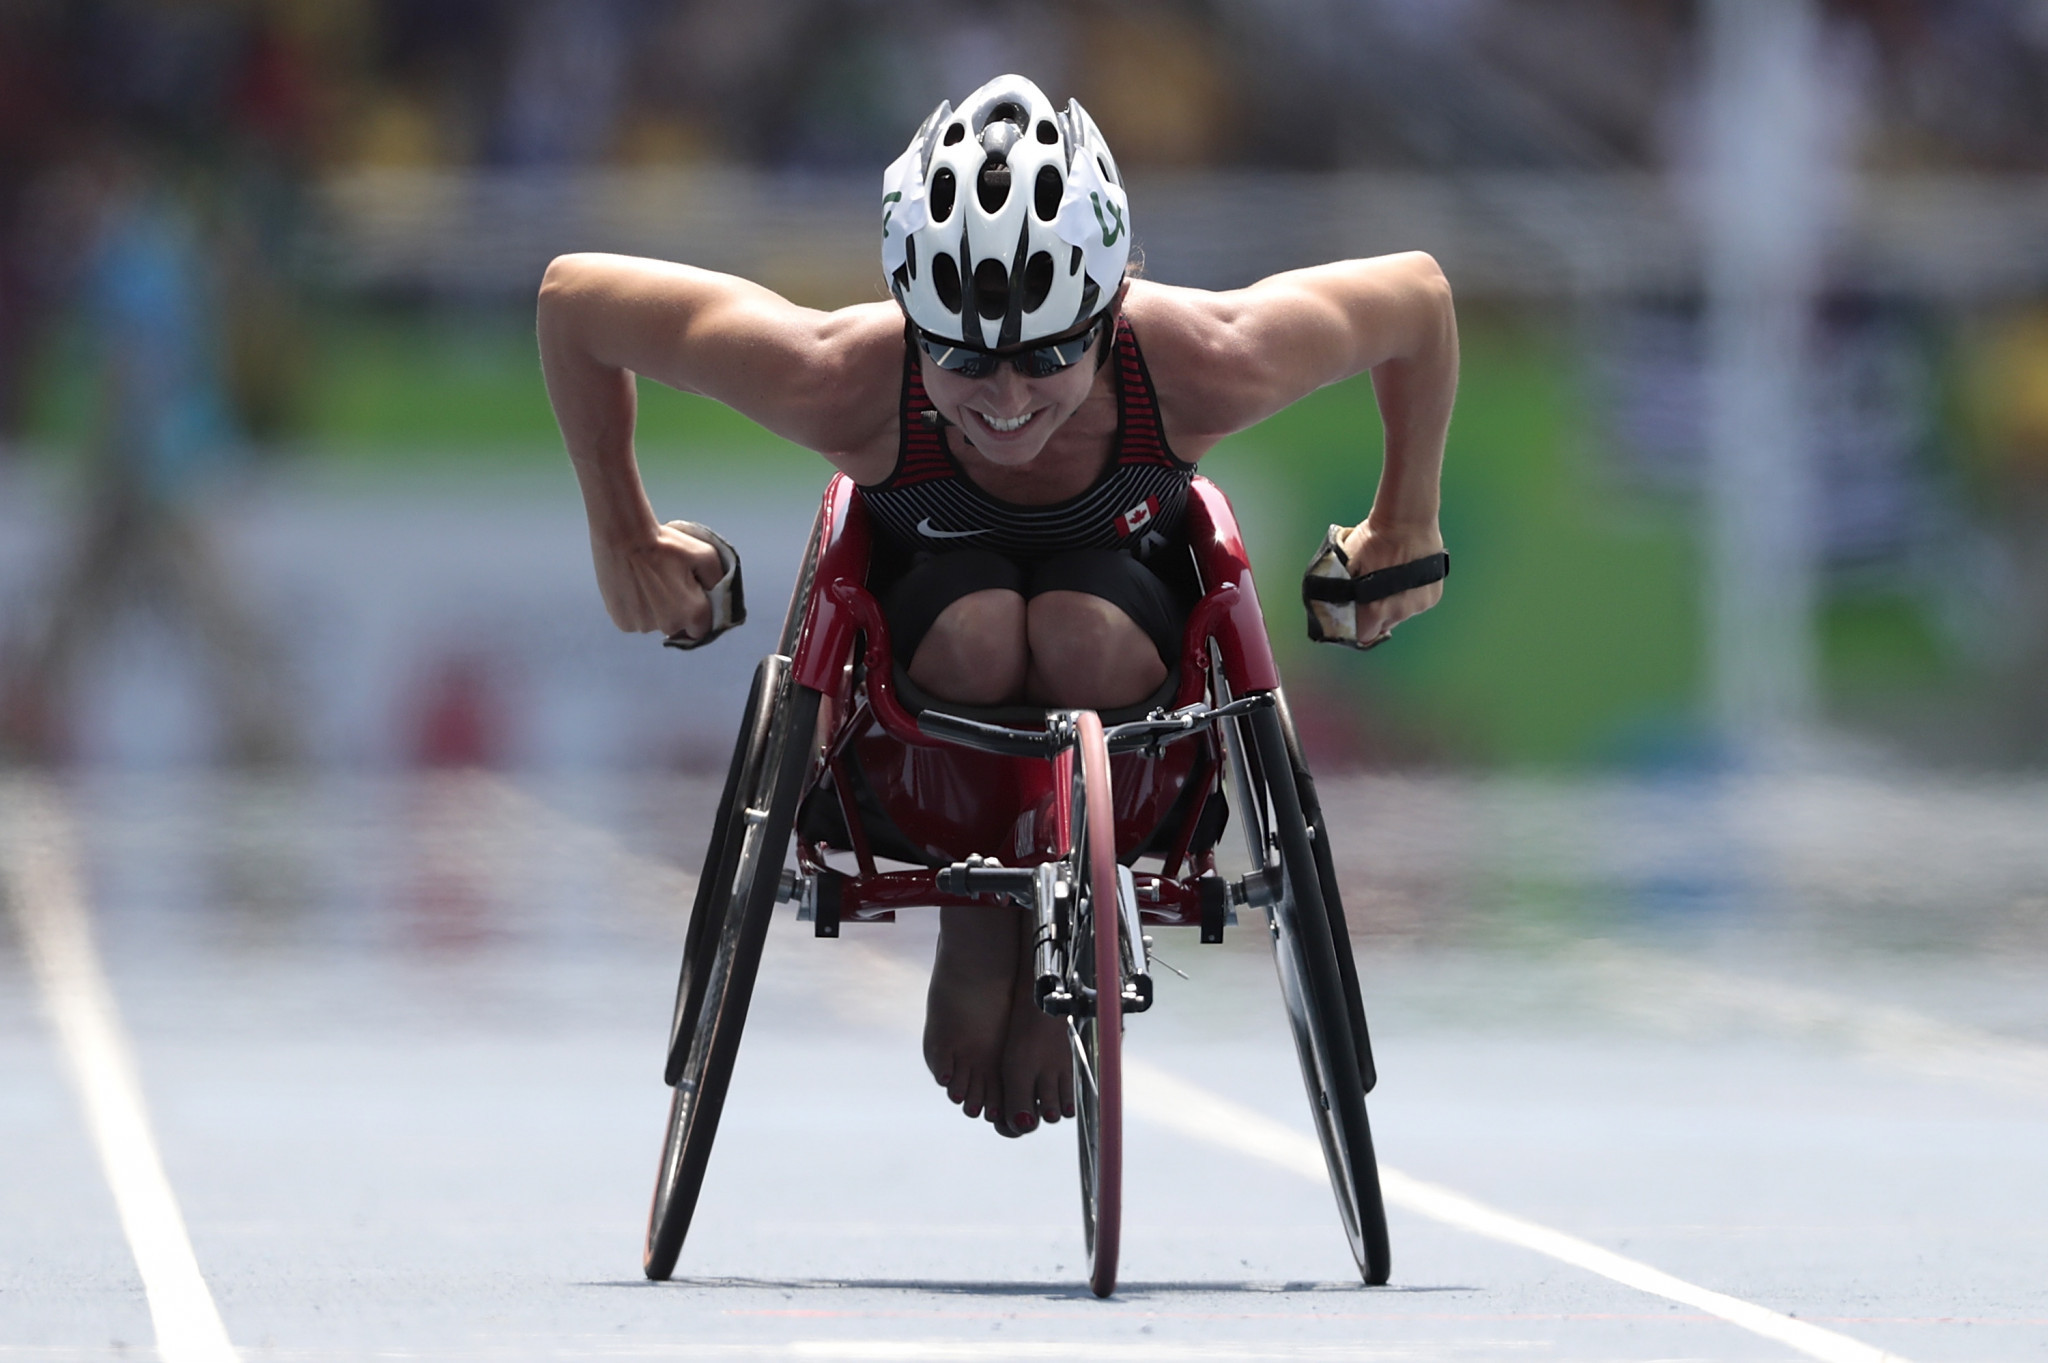 The women's T52 100m event was won by Michelle Stilwell at Rio 2016 ©Getty Images